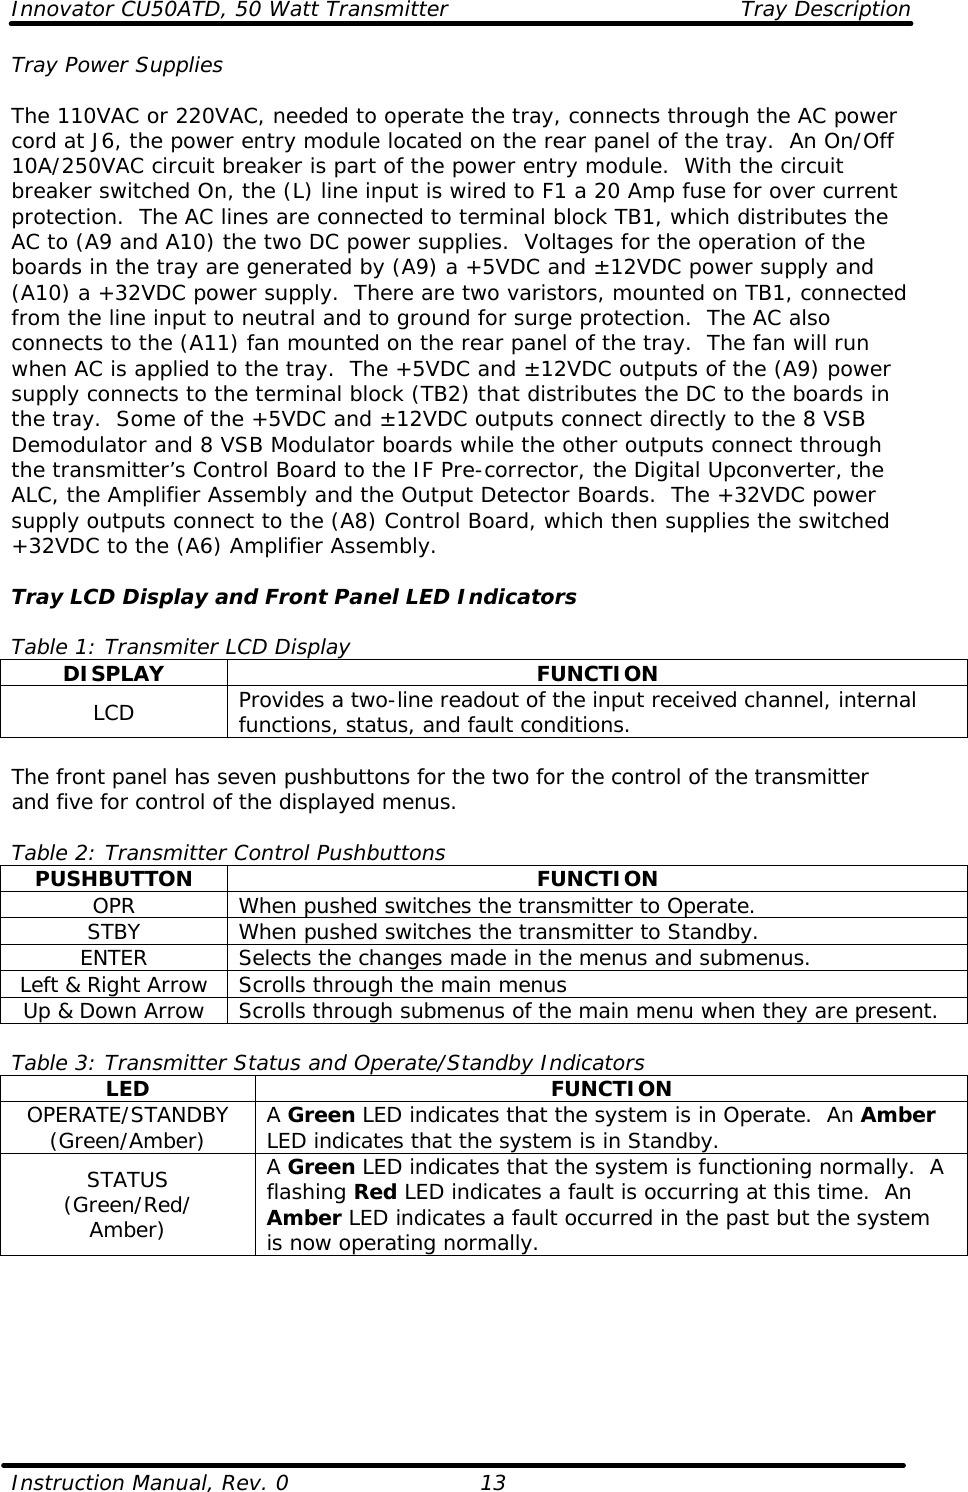 Innovator CU50ATD, 50 Watt Transmitter Tray Description  Instruction Manual, Rev. 0    13 Tray Power Supplies  The 110VAC or 220VAC, needed to operate the tray, connects through the AC power cord at J6, the power entry module located on the rear panel of the tray.  An On/Off 10A/250VAC circuit breaker is part of the power entry module.  With the circuit breaker switched On, the (L) line input is wired to F1 a 20 Amp fuse for over current protection.  The AC lines are connected to terminal block TB1, which distributes the AC to (A9 and A10) the two DC power supplies.  Voltages for the operation of the boards in the tray are generated by (A9) a +5VDC and ±12VDC power supply and (A10) a +32VDC power supply.  There are two varistors, mounted on TB1, connected from the line input to neutral and to ground for surge protection.  The AC also connects to the (A11) fan mounted on the rear panel of the tray.  The fan will run when AC is applied to the tray.  The +5VDC and ±12VDC outputs of the (A9) power supply connects to the terminal block (TB2) that distributes the DC to the boards in the tray.  Some of the +5VDC and ±12VDC outputs connect directly to the 8 VSB Demodulator and 8 VSB Modulator boards while the other outputs connect through the transmitter’s Control Board to the IF Pre-corrector, the Digital Upconverter, the ALC, the Amplifier Assembly and the Output Detector Boards.  The +32VDC power supply outputs connect to the (A8) Control Board, which then supplies the switched +32VDC to the (A6) Amplifier Assembly.  Tray LCD Display and Front Panel LED Indicators  Table 1: Transmiter LCD Display DISPLAY FUNCTION LCD Provides a two-line readout of the input received channel, internal functions, status, and fault conditions.  The front panel has seven pushbuttons for the two for the control of the transmitter and five for control of the displayed menus.  Table 2: Transmitter Control Pushbuttons PUSHBUTTON FUNCTION OPR When pushed switches the transmitter to Operate. STBY When pushed switches the transmitter to Standby. ENTER Selects the changes made in the menus and submenus. Left &amp; Right Arrow Scrolls through the main menus Up &amp; Down Arrow Scrolls through submenus of the main menu when they are present.  Table 3: Transmitter Status and Operate/Standby Indicators LED FUNCTION OPERATE/STANDBY (Green/Amber) A Green LED indicates that the system is in Operate.  An Amber LED indicates that the system is in Standby. STATUS (Green/Red/ Amber) A Green LED indicates that the system is functioning normally.  A flashing Red LED indicates a fault is occurring at this time.  An Amber LED indicates a fault occurred in the past but the system is now operating normally.  